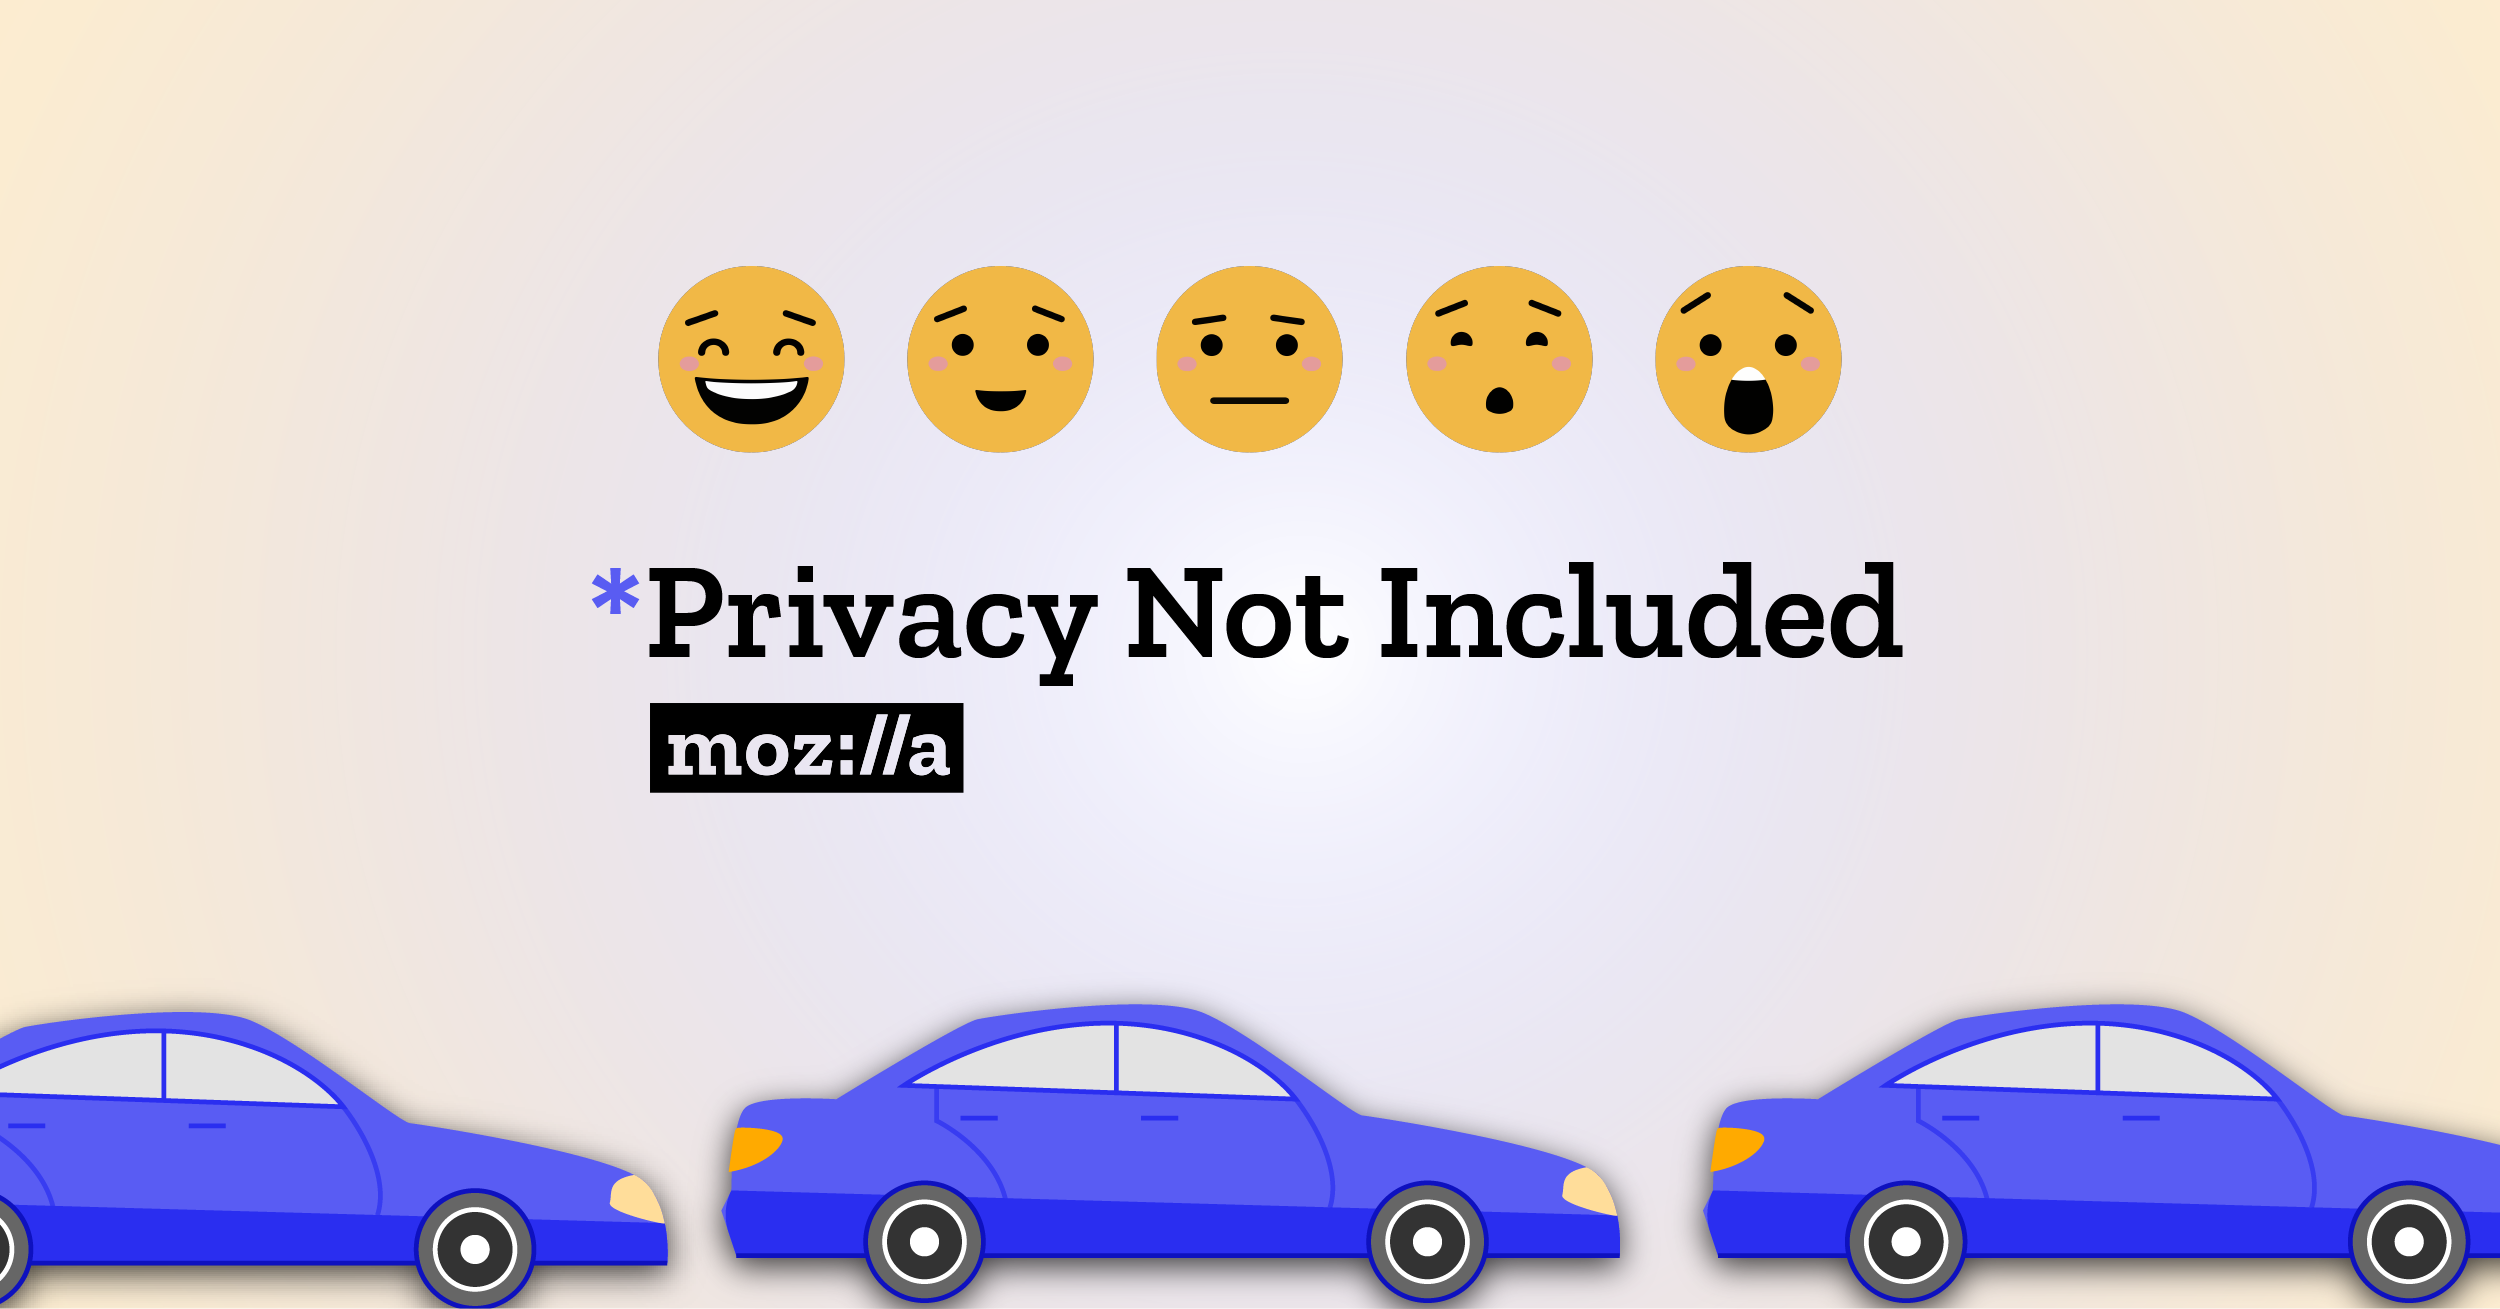 25 Major Car Brands Get Failing Marks From Mozilla for Security and Privacy  – Source: www.securityweek.com